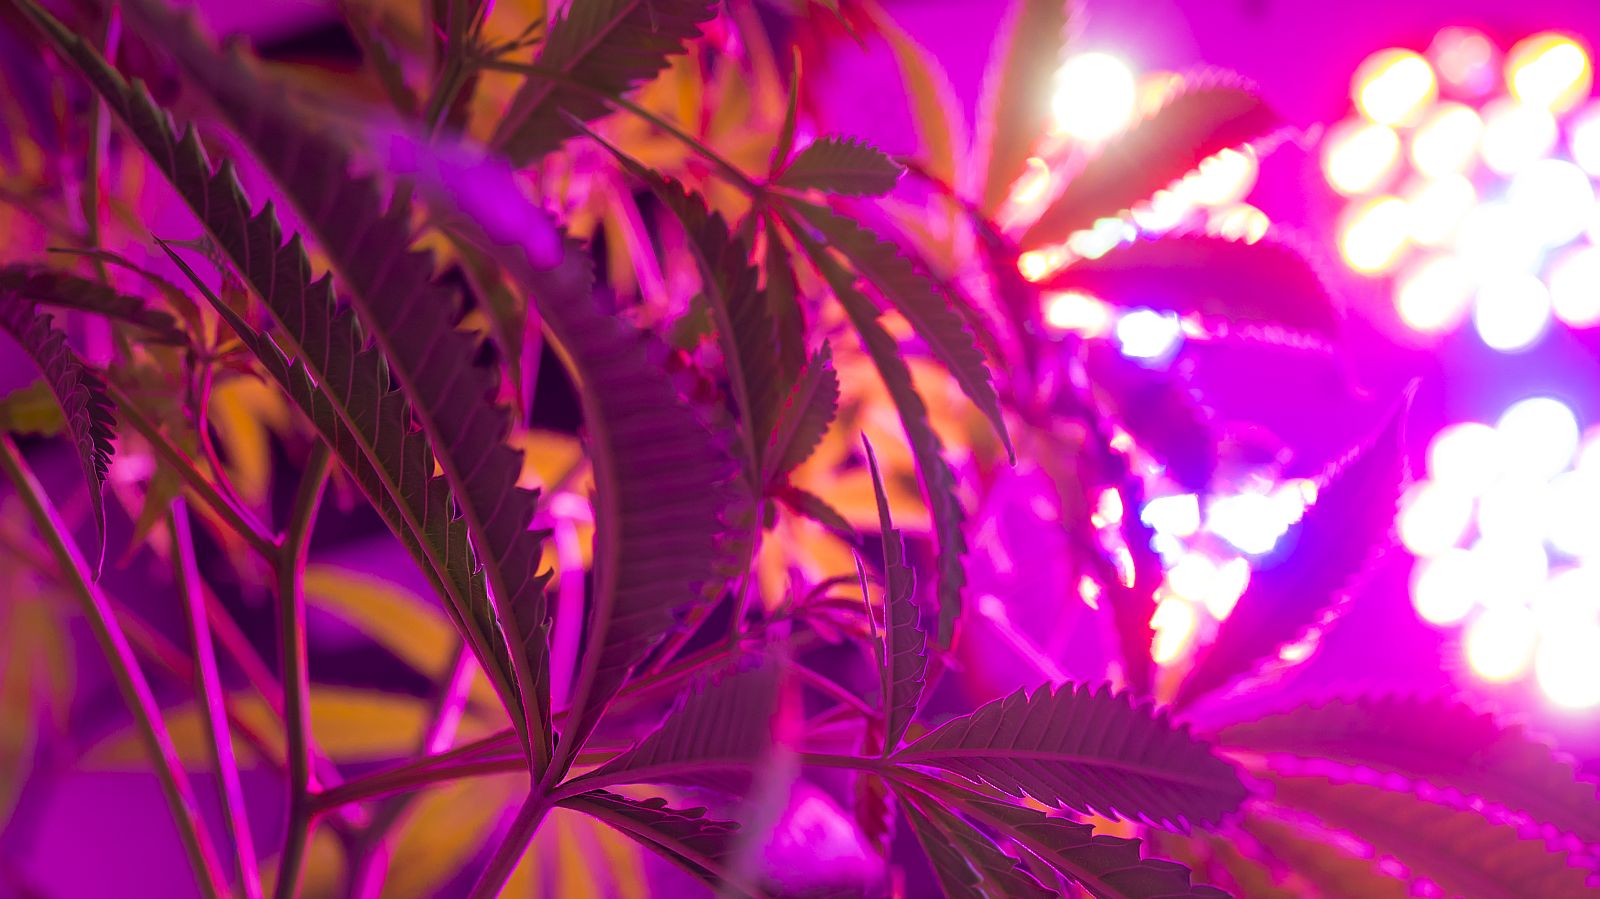 Can you grow weed with normal led lights